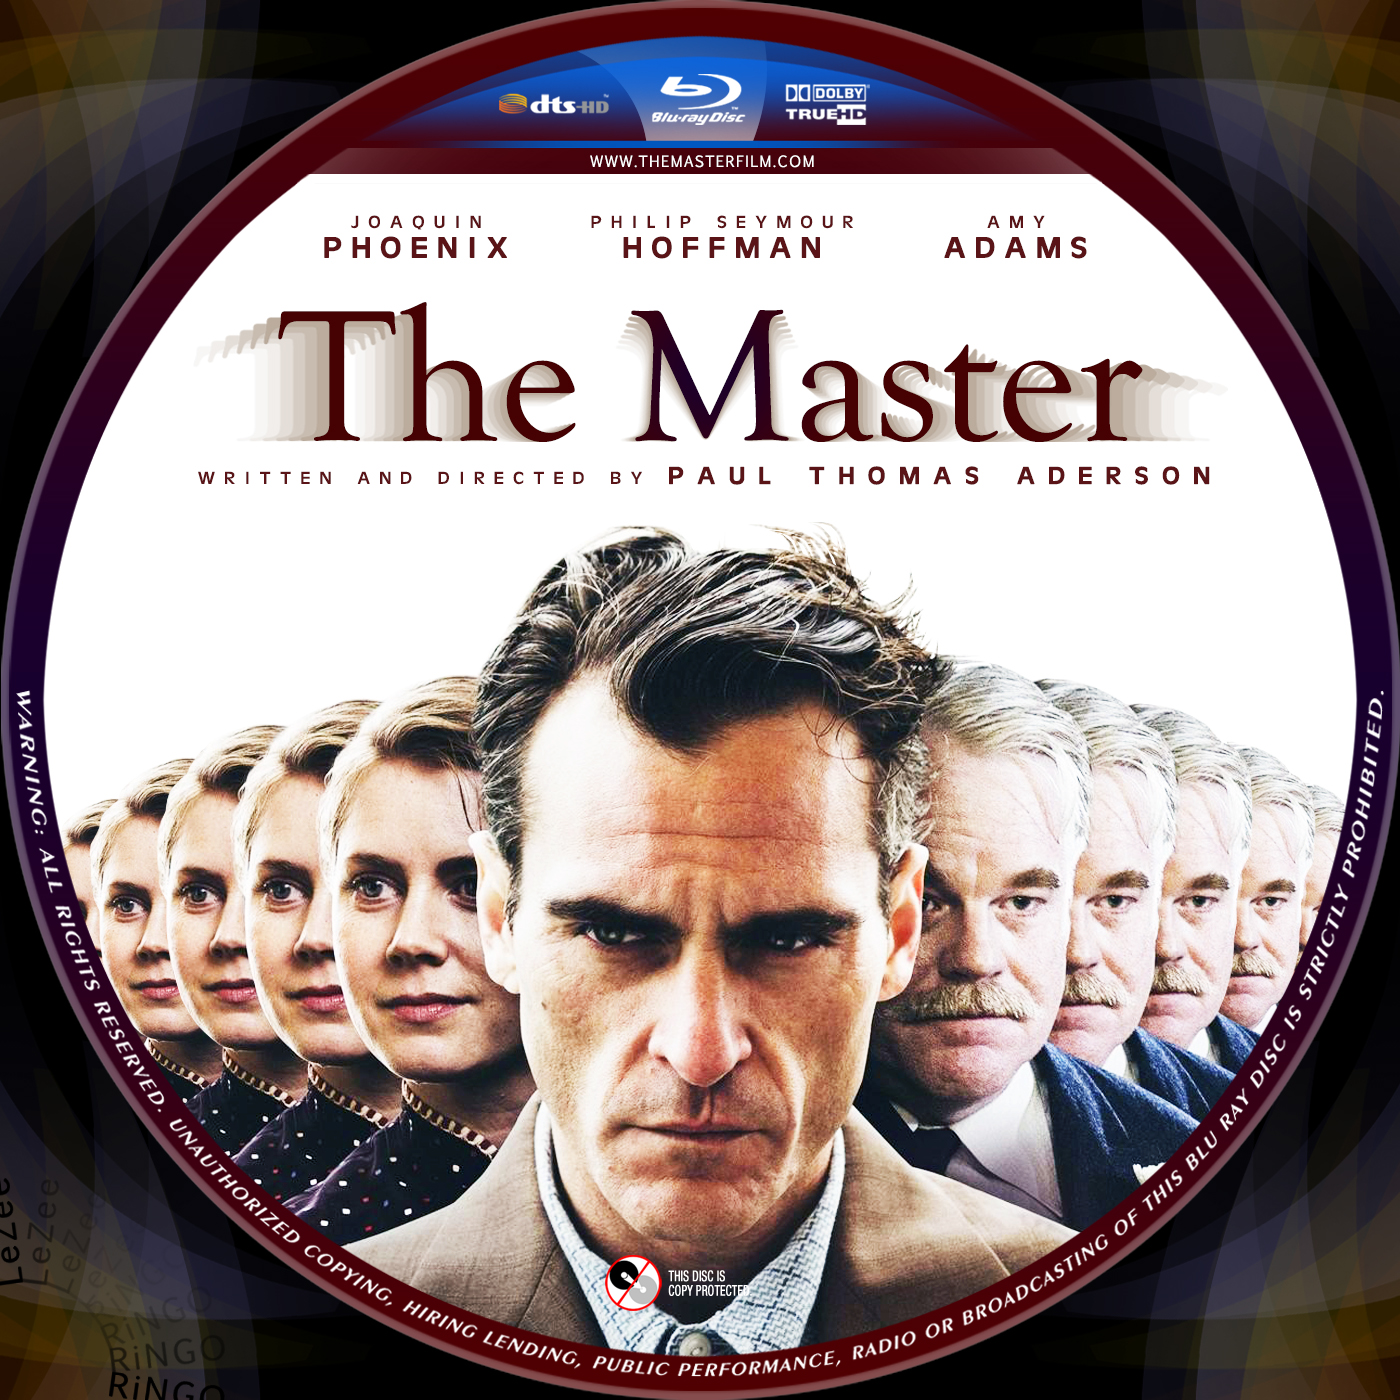 2012 обложка. Мастер 2012. The Master 2012 Blu-ray. The Master 2012 poster DVD.